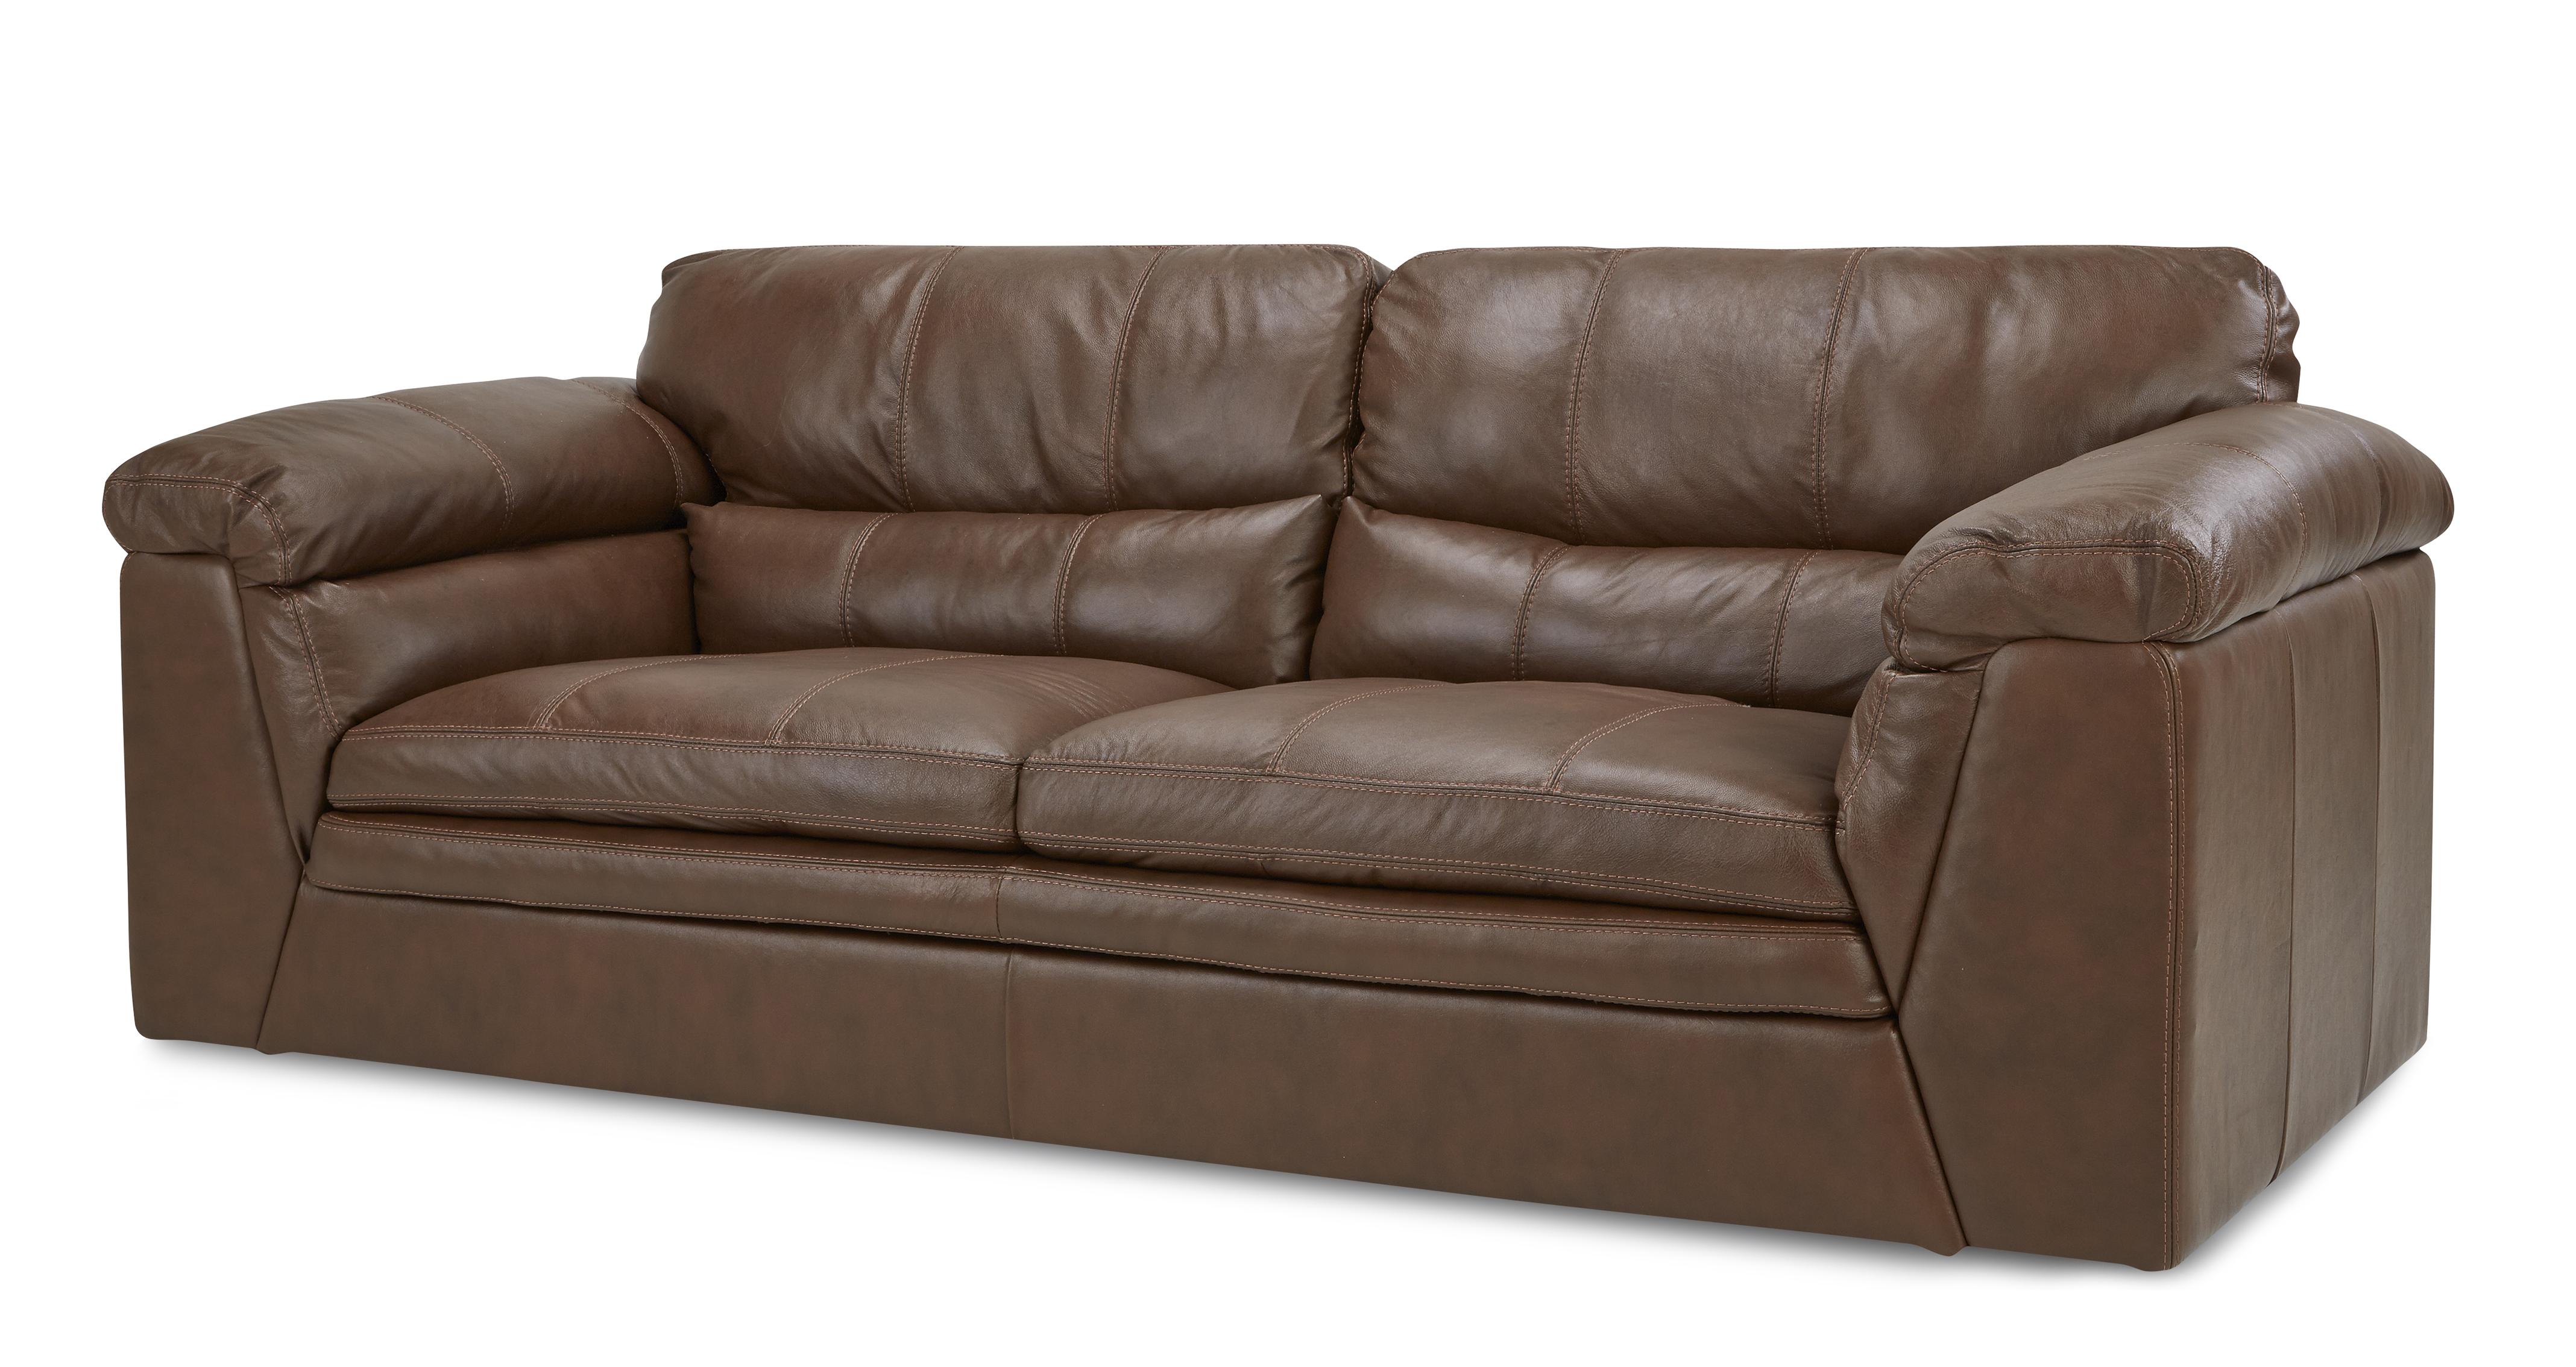 leon leather sofa review